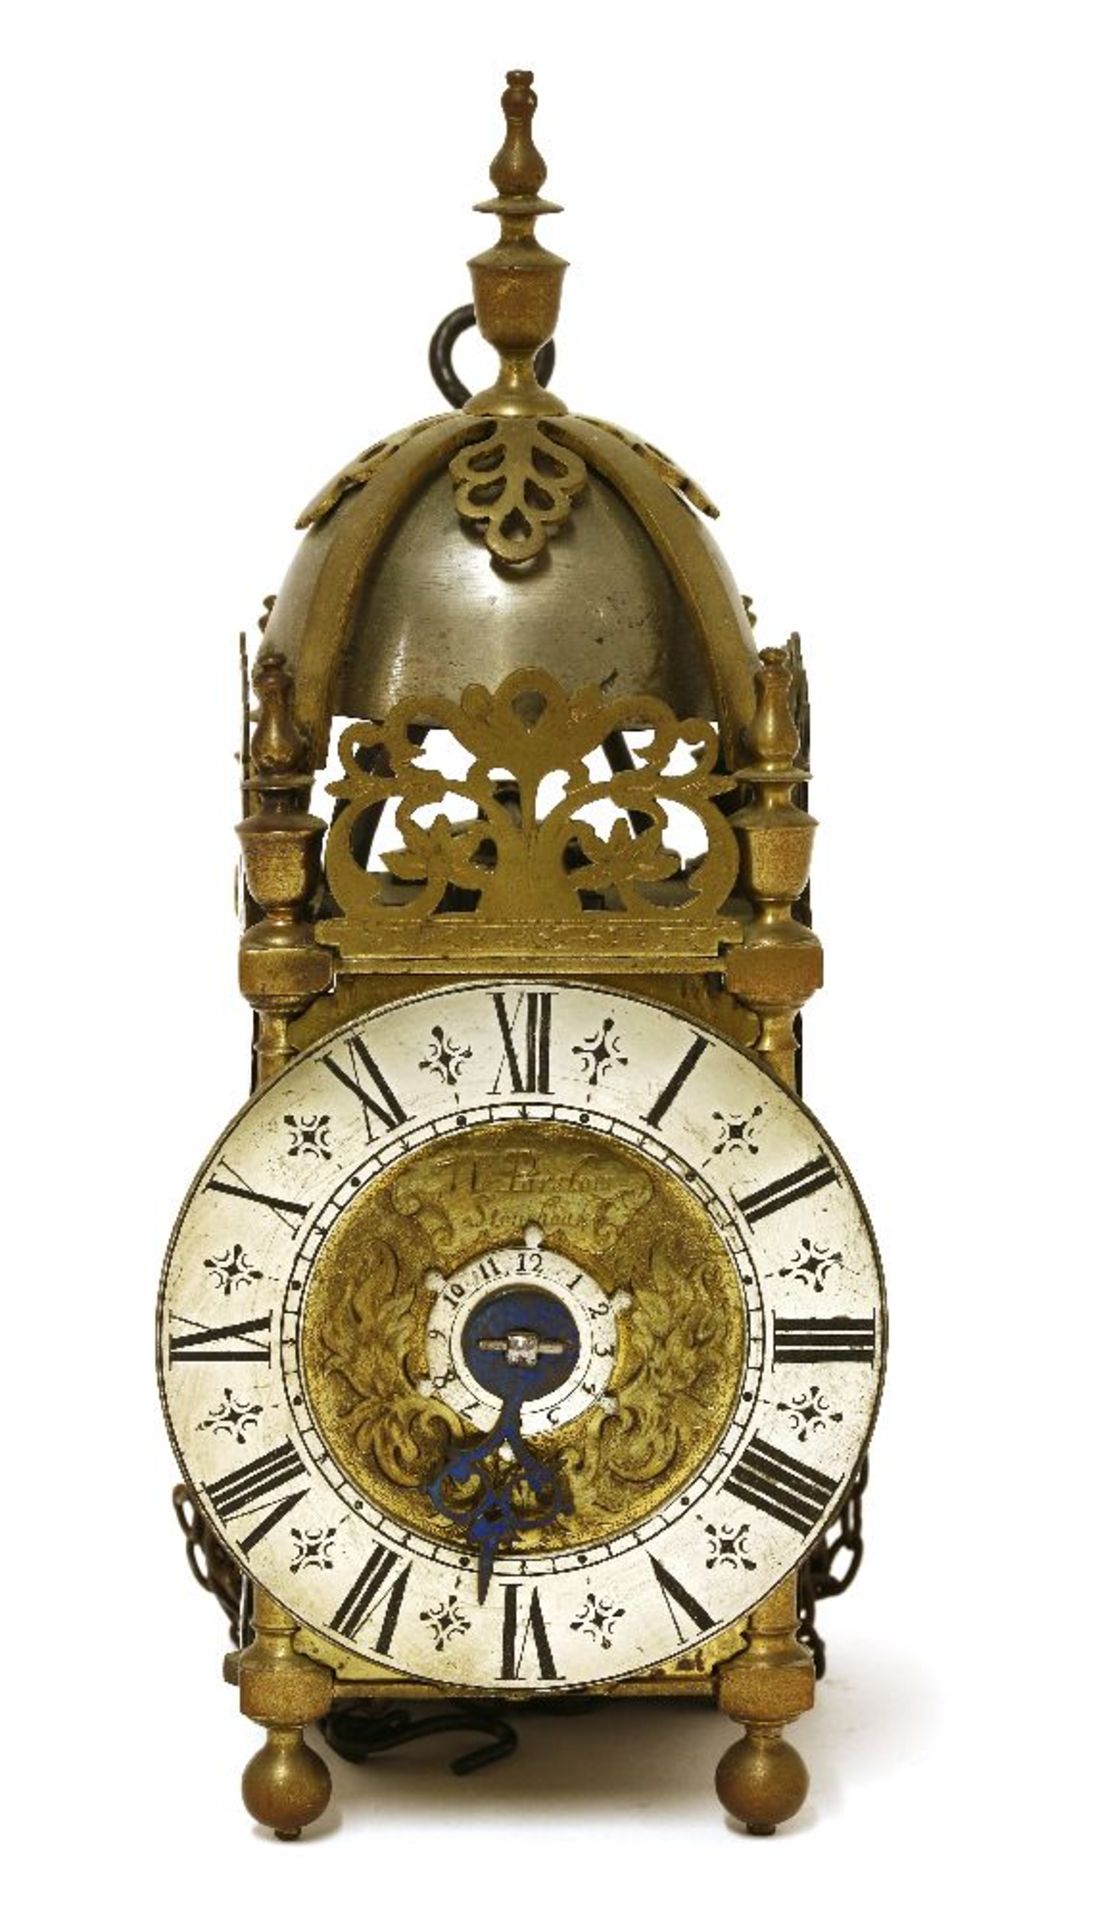 A small brass lantern clock,17th century, by William Parslow, Stonehouse, with an outside count